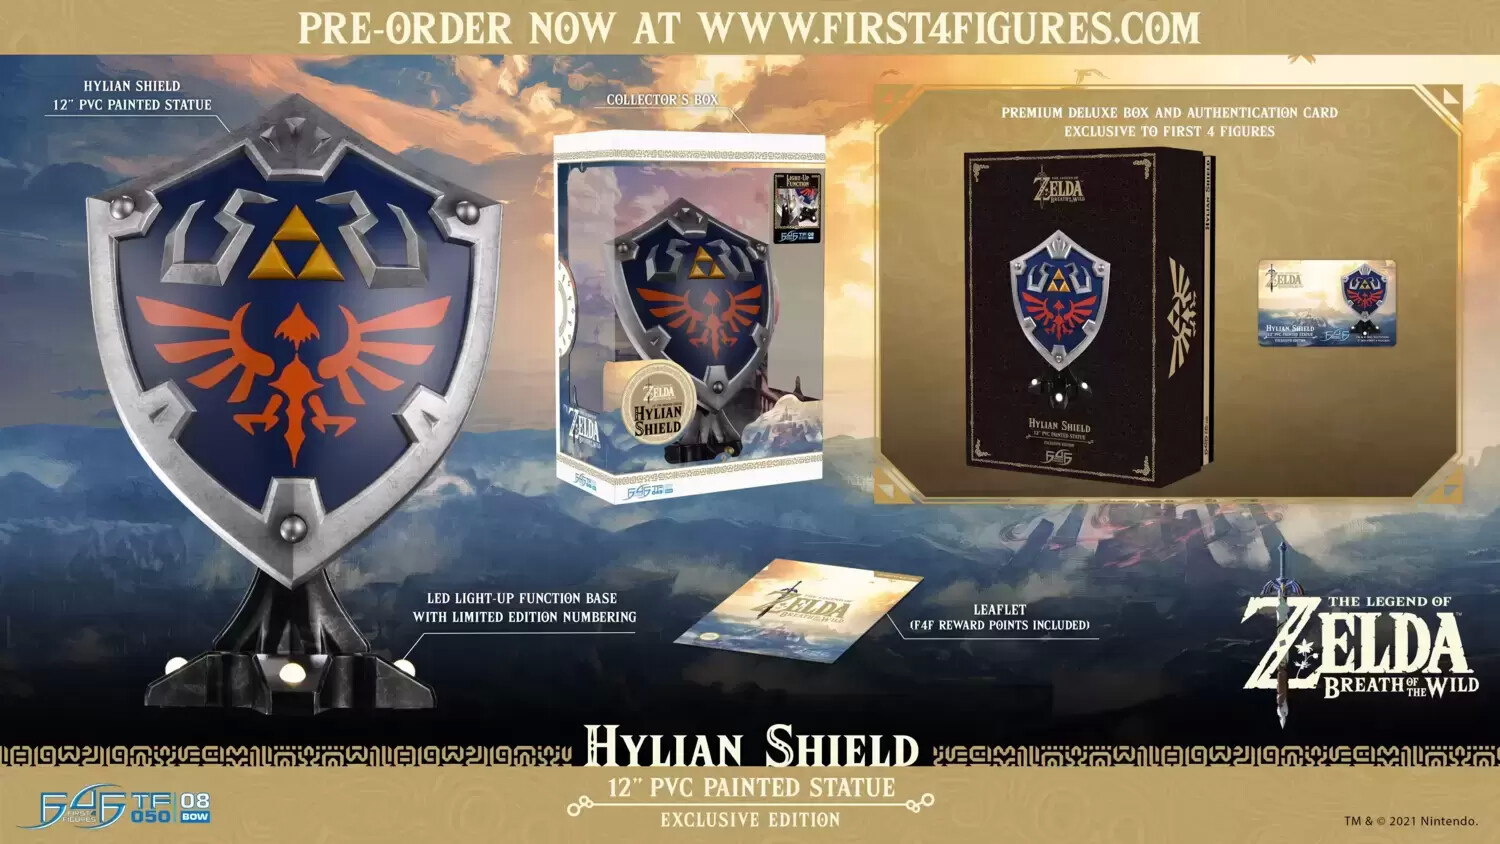 First 4 Figures (F4F) - The Legend of Zelda: Breath of the Wild - Hylian Shield - Exclusive Edition